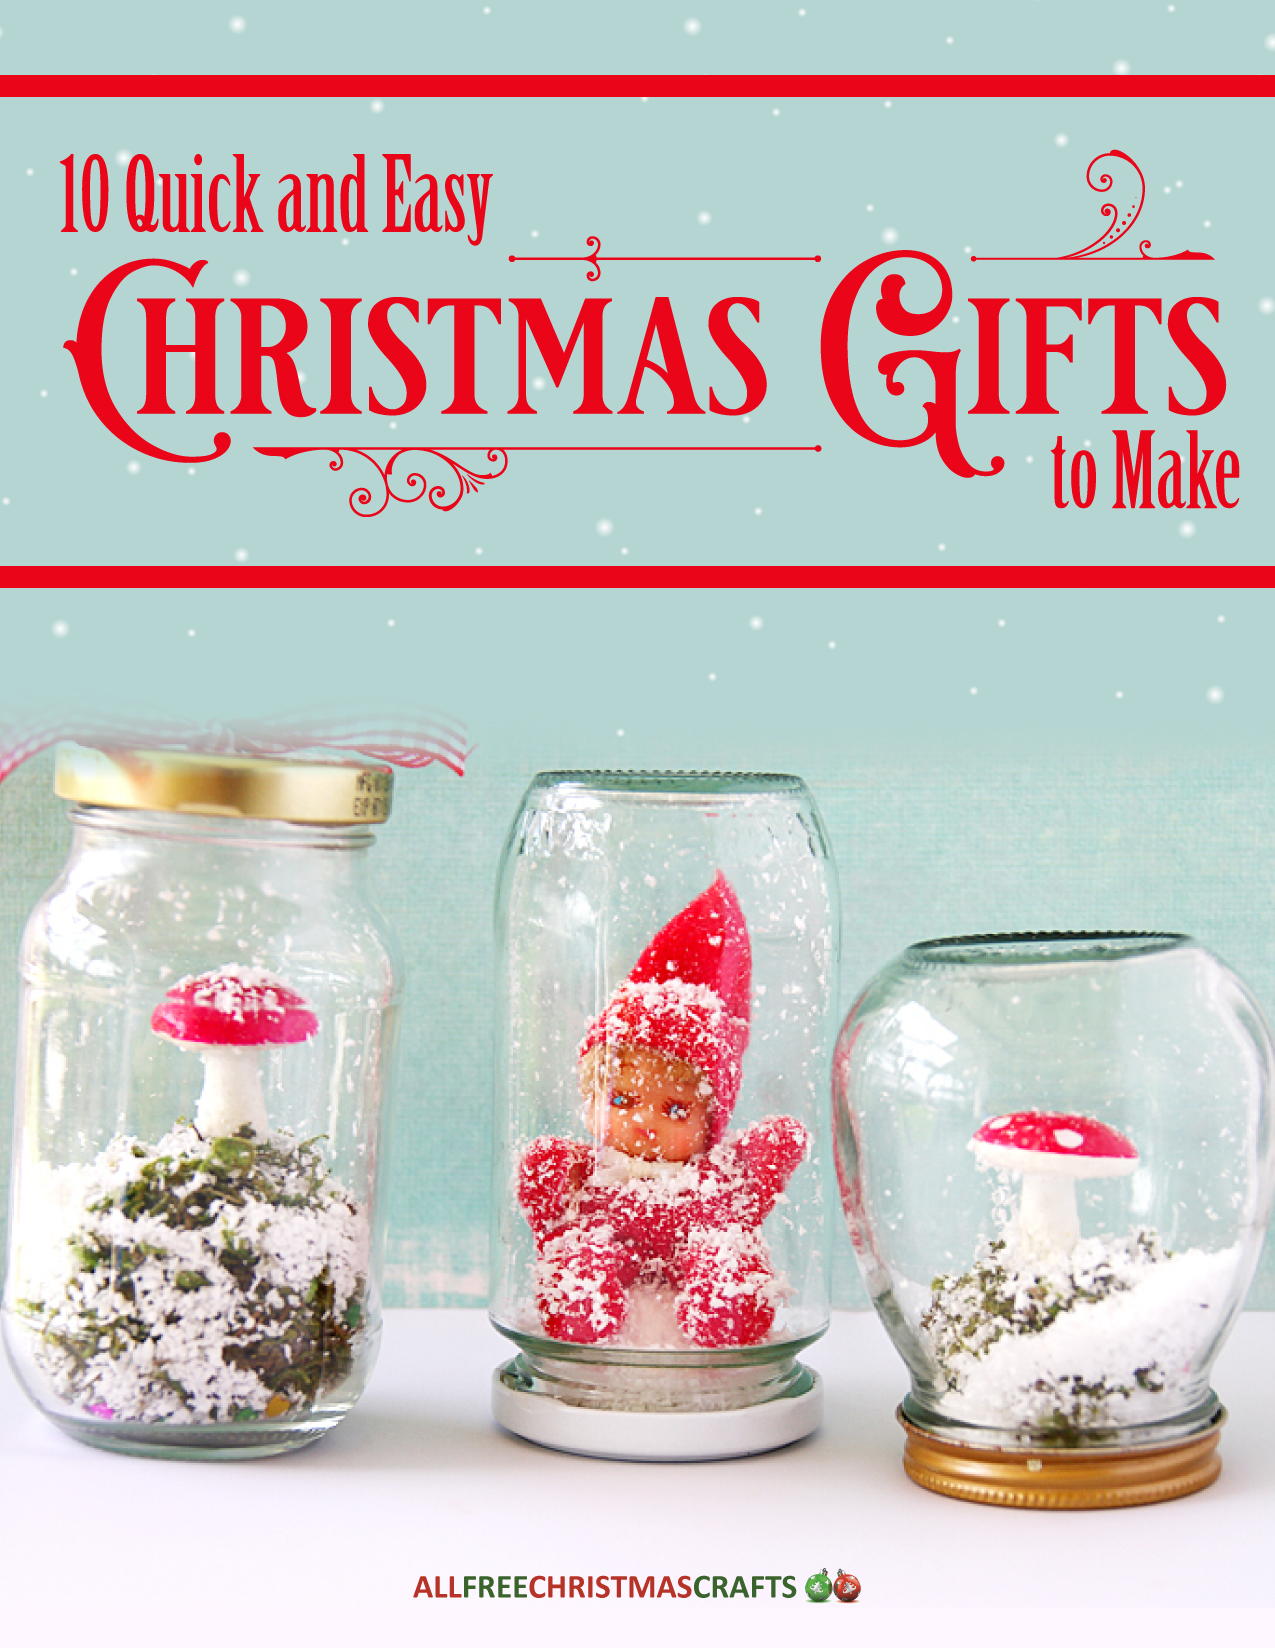 10 Quick & Easy Christmas Gifts to Make free eBook